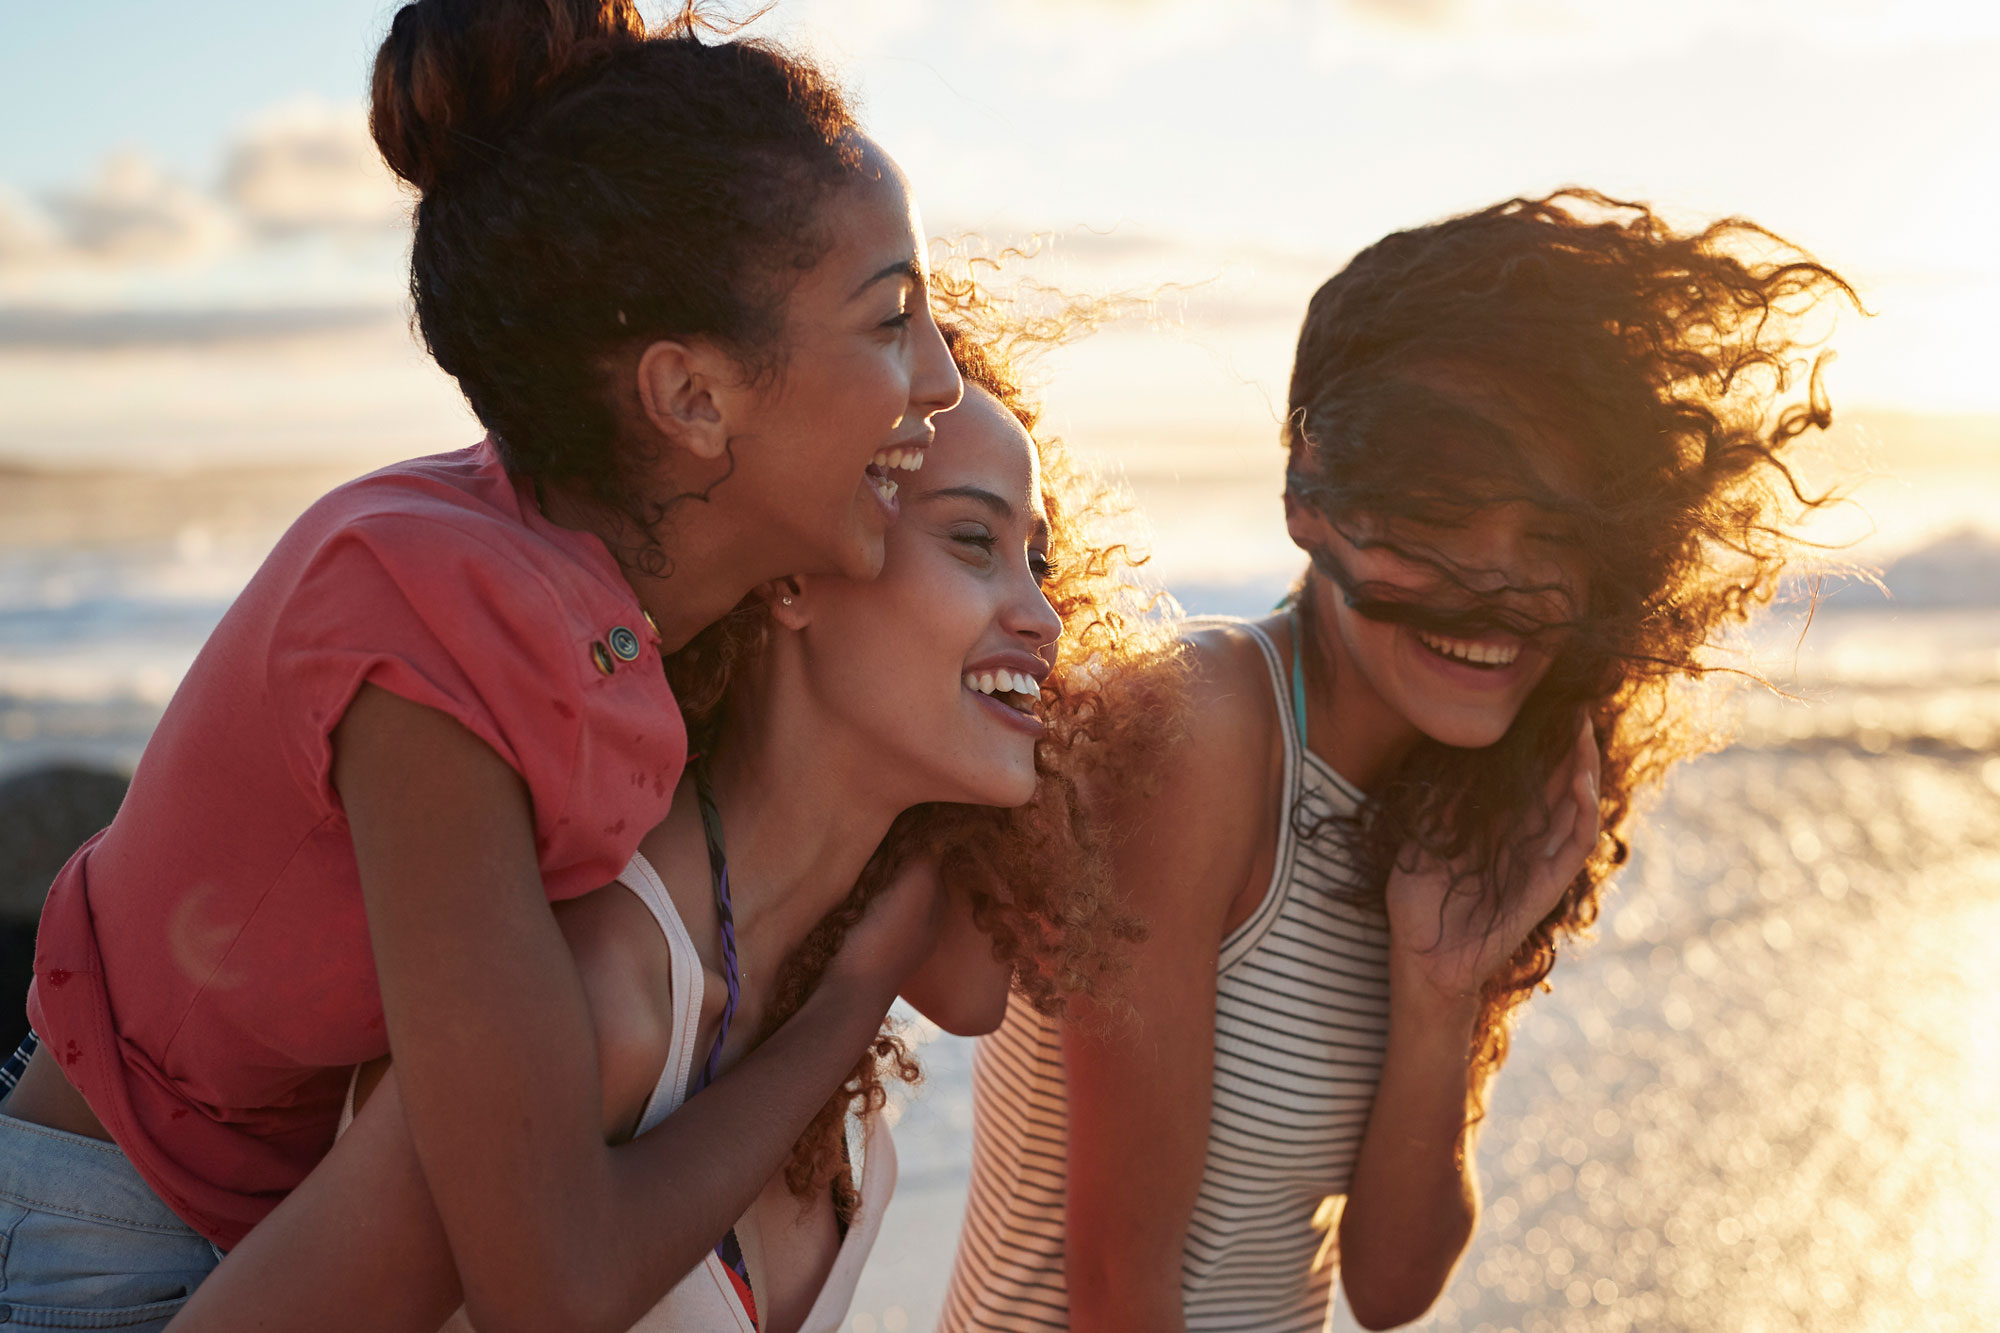 group of women laughing at the beach